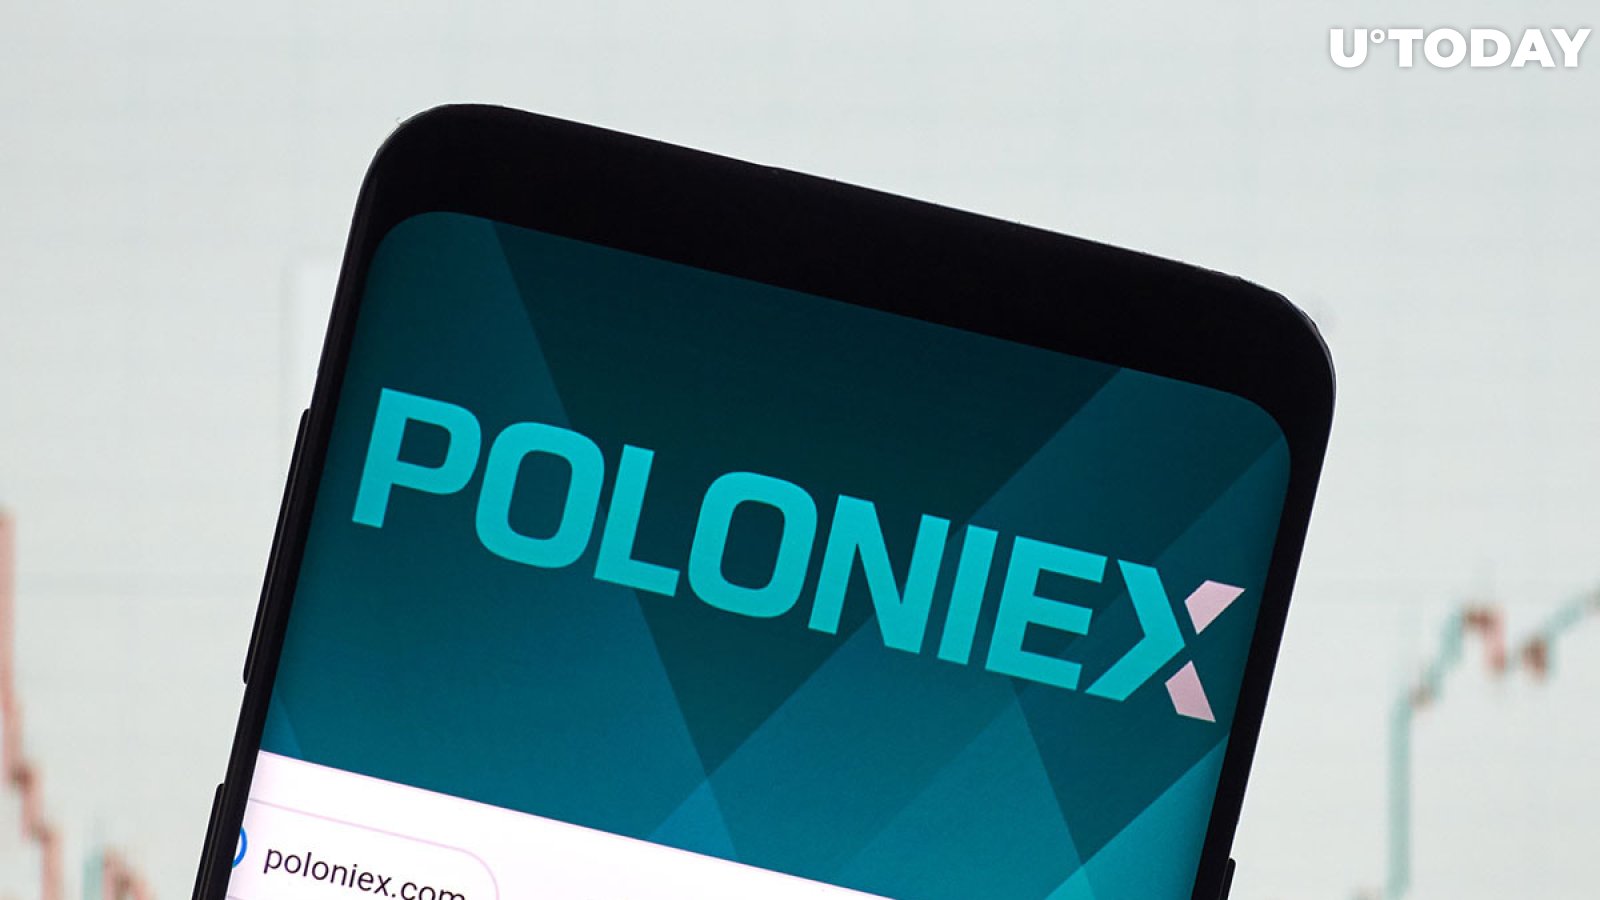 Poloniex Exchange Faces Unexpected Issue, Are Funds SAFU?